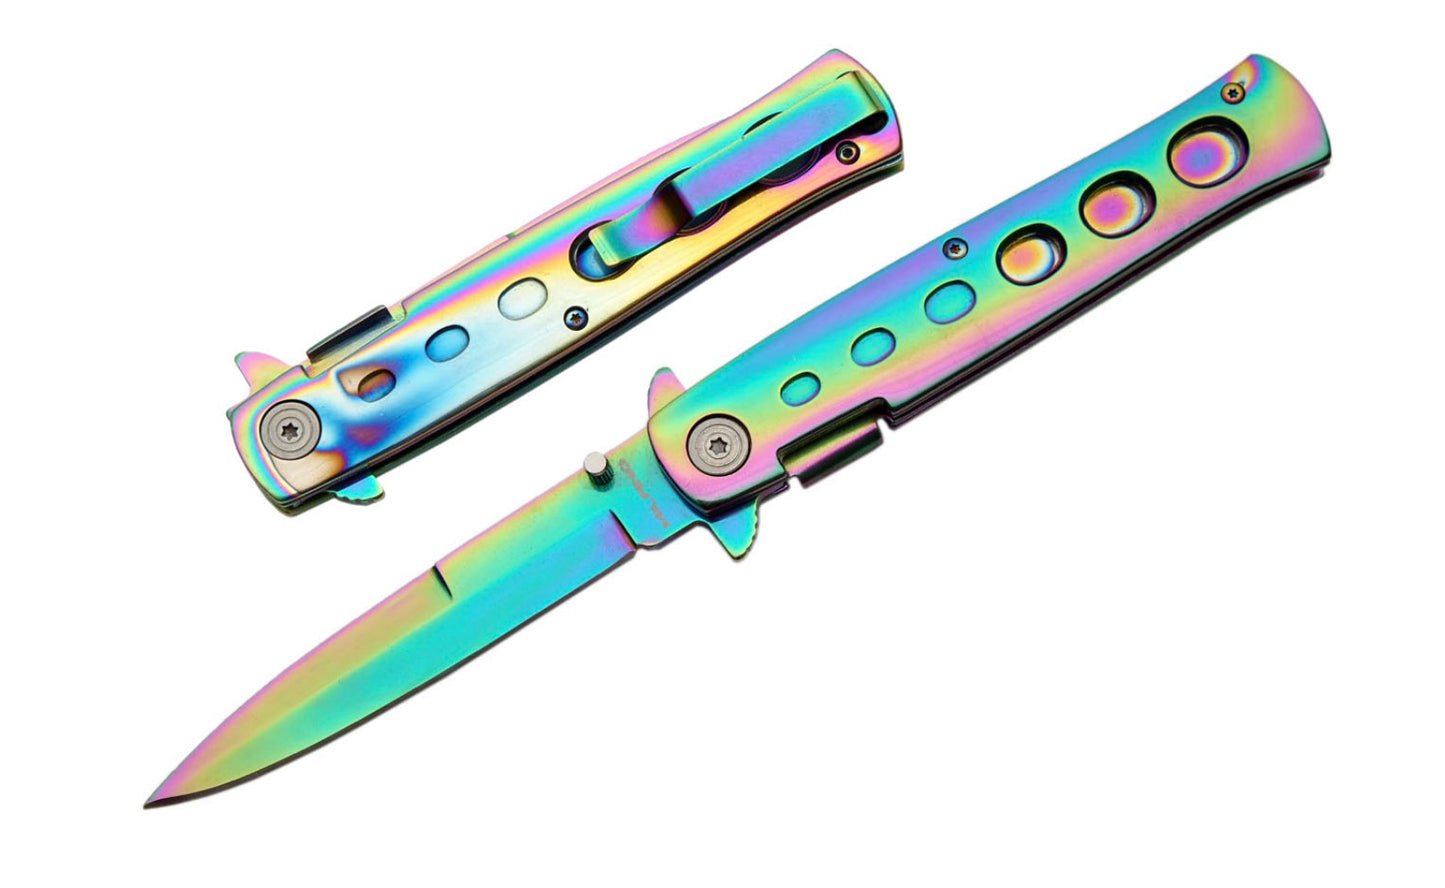 Two rainbow Stiletto Type Folding Knives, one in the open position, and one in the closed position.